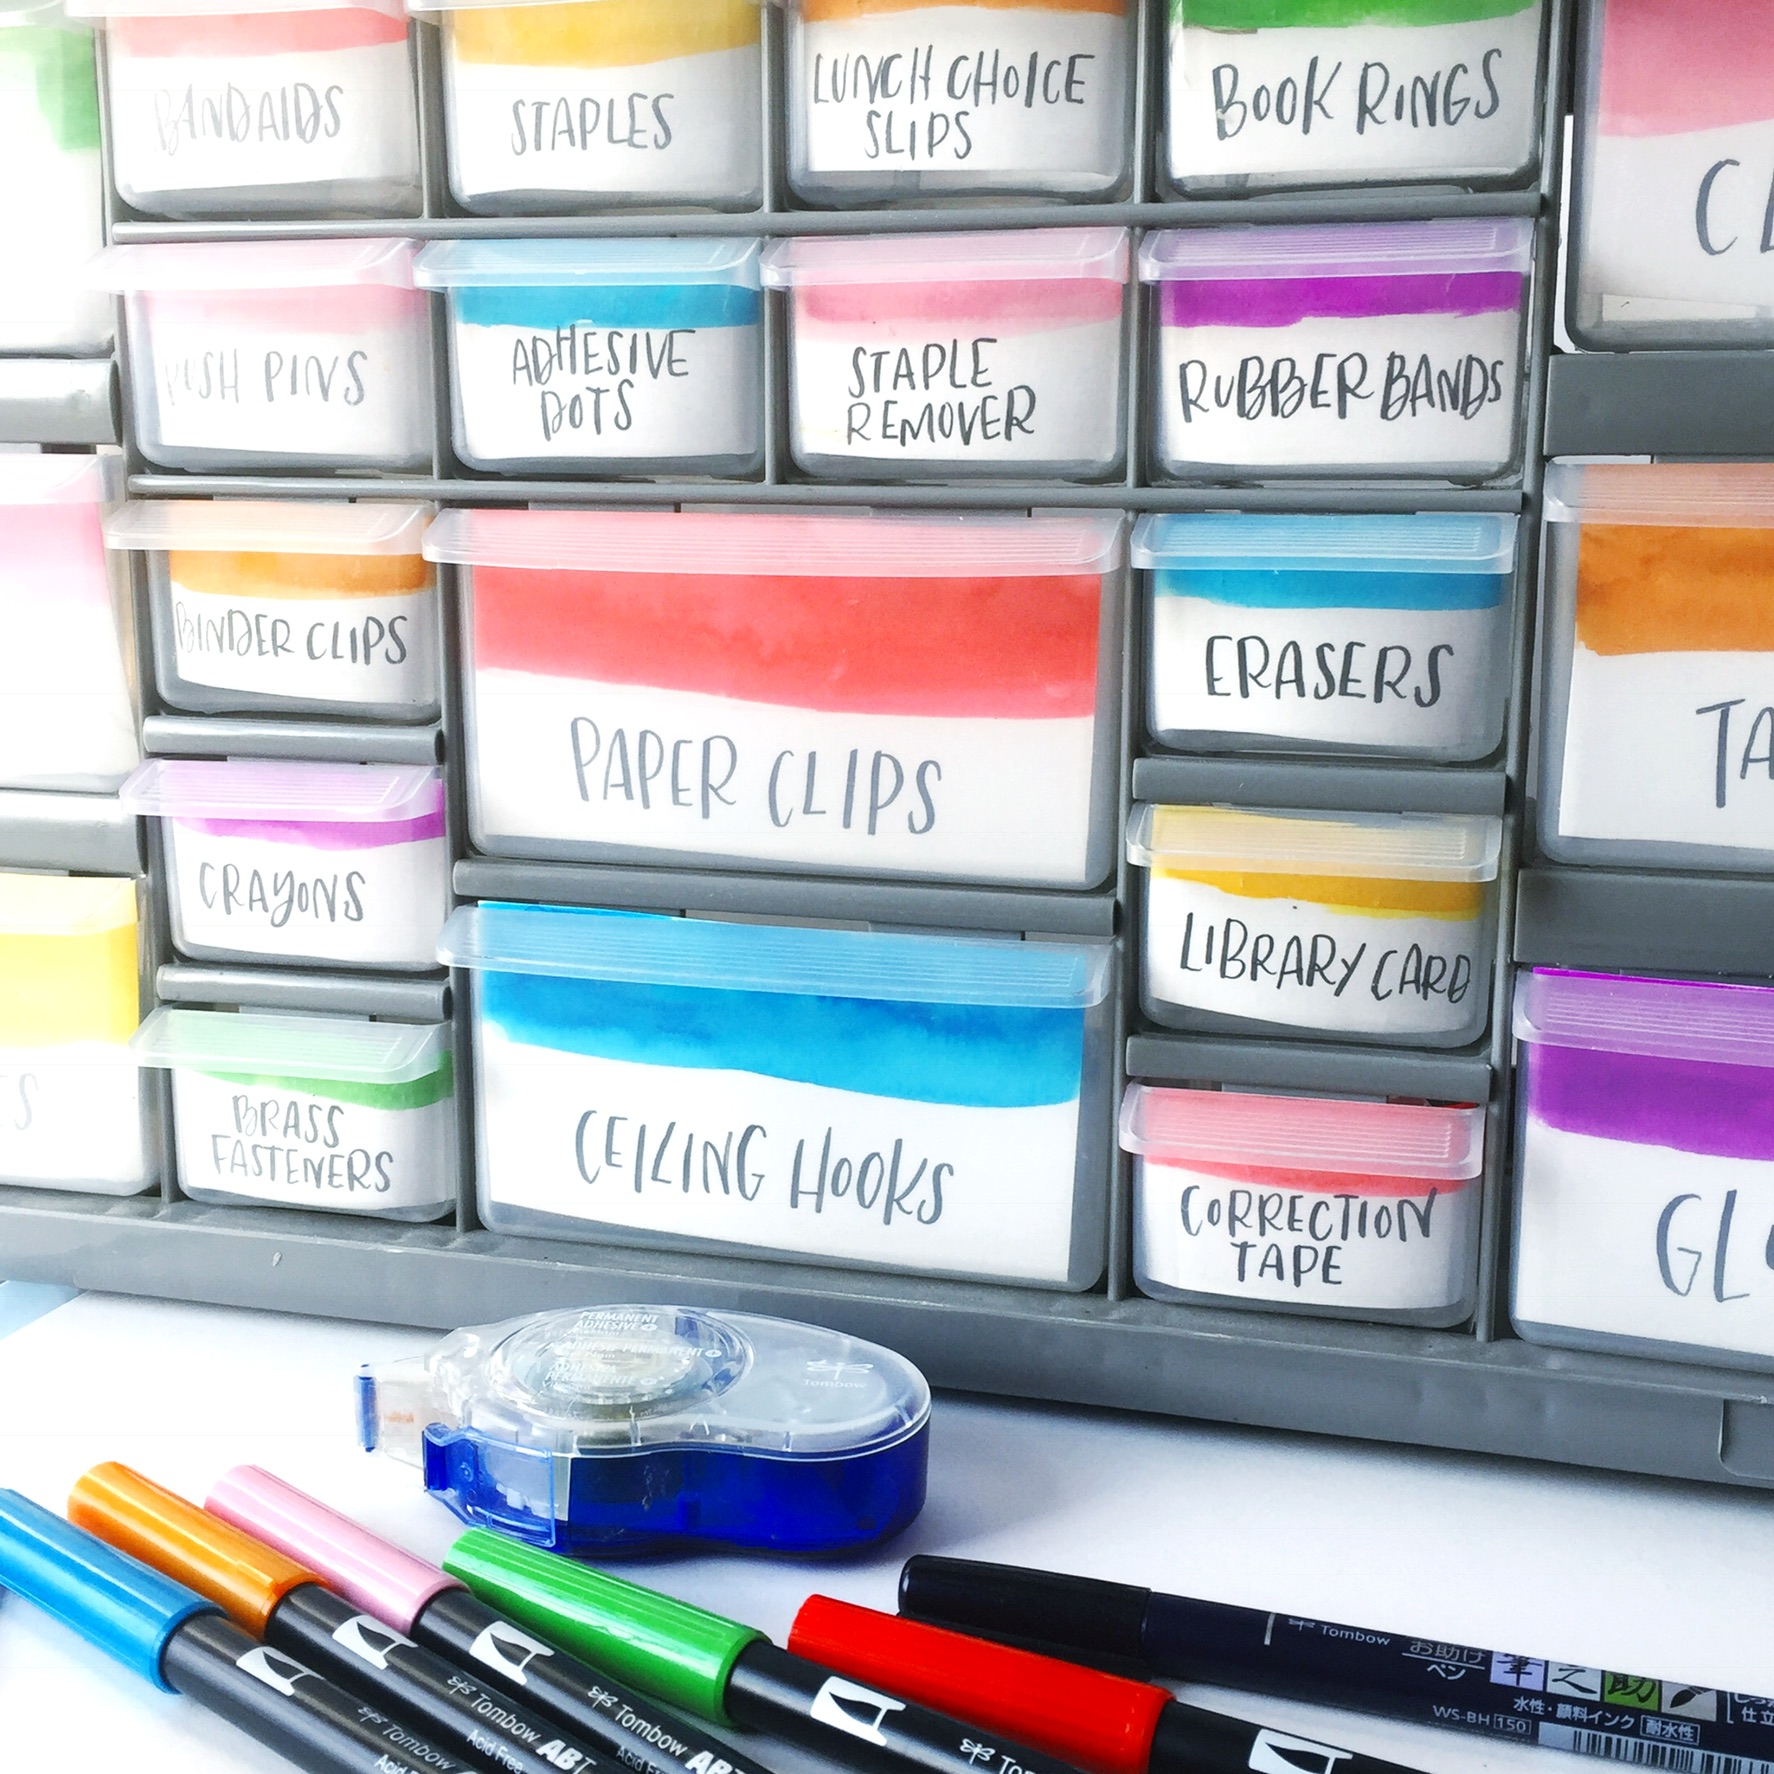 Lauren Fitzmaurice of @renmadecalligraphy shows you step by step how to create a teacher tool box that is perfect for back to school, using Tombow USA products. For more lettering and craft tips and tricks check out @renmadecalligraphy on instagram and renmadecalligraphy.com.